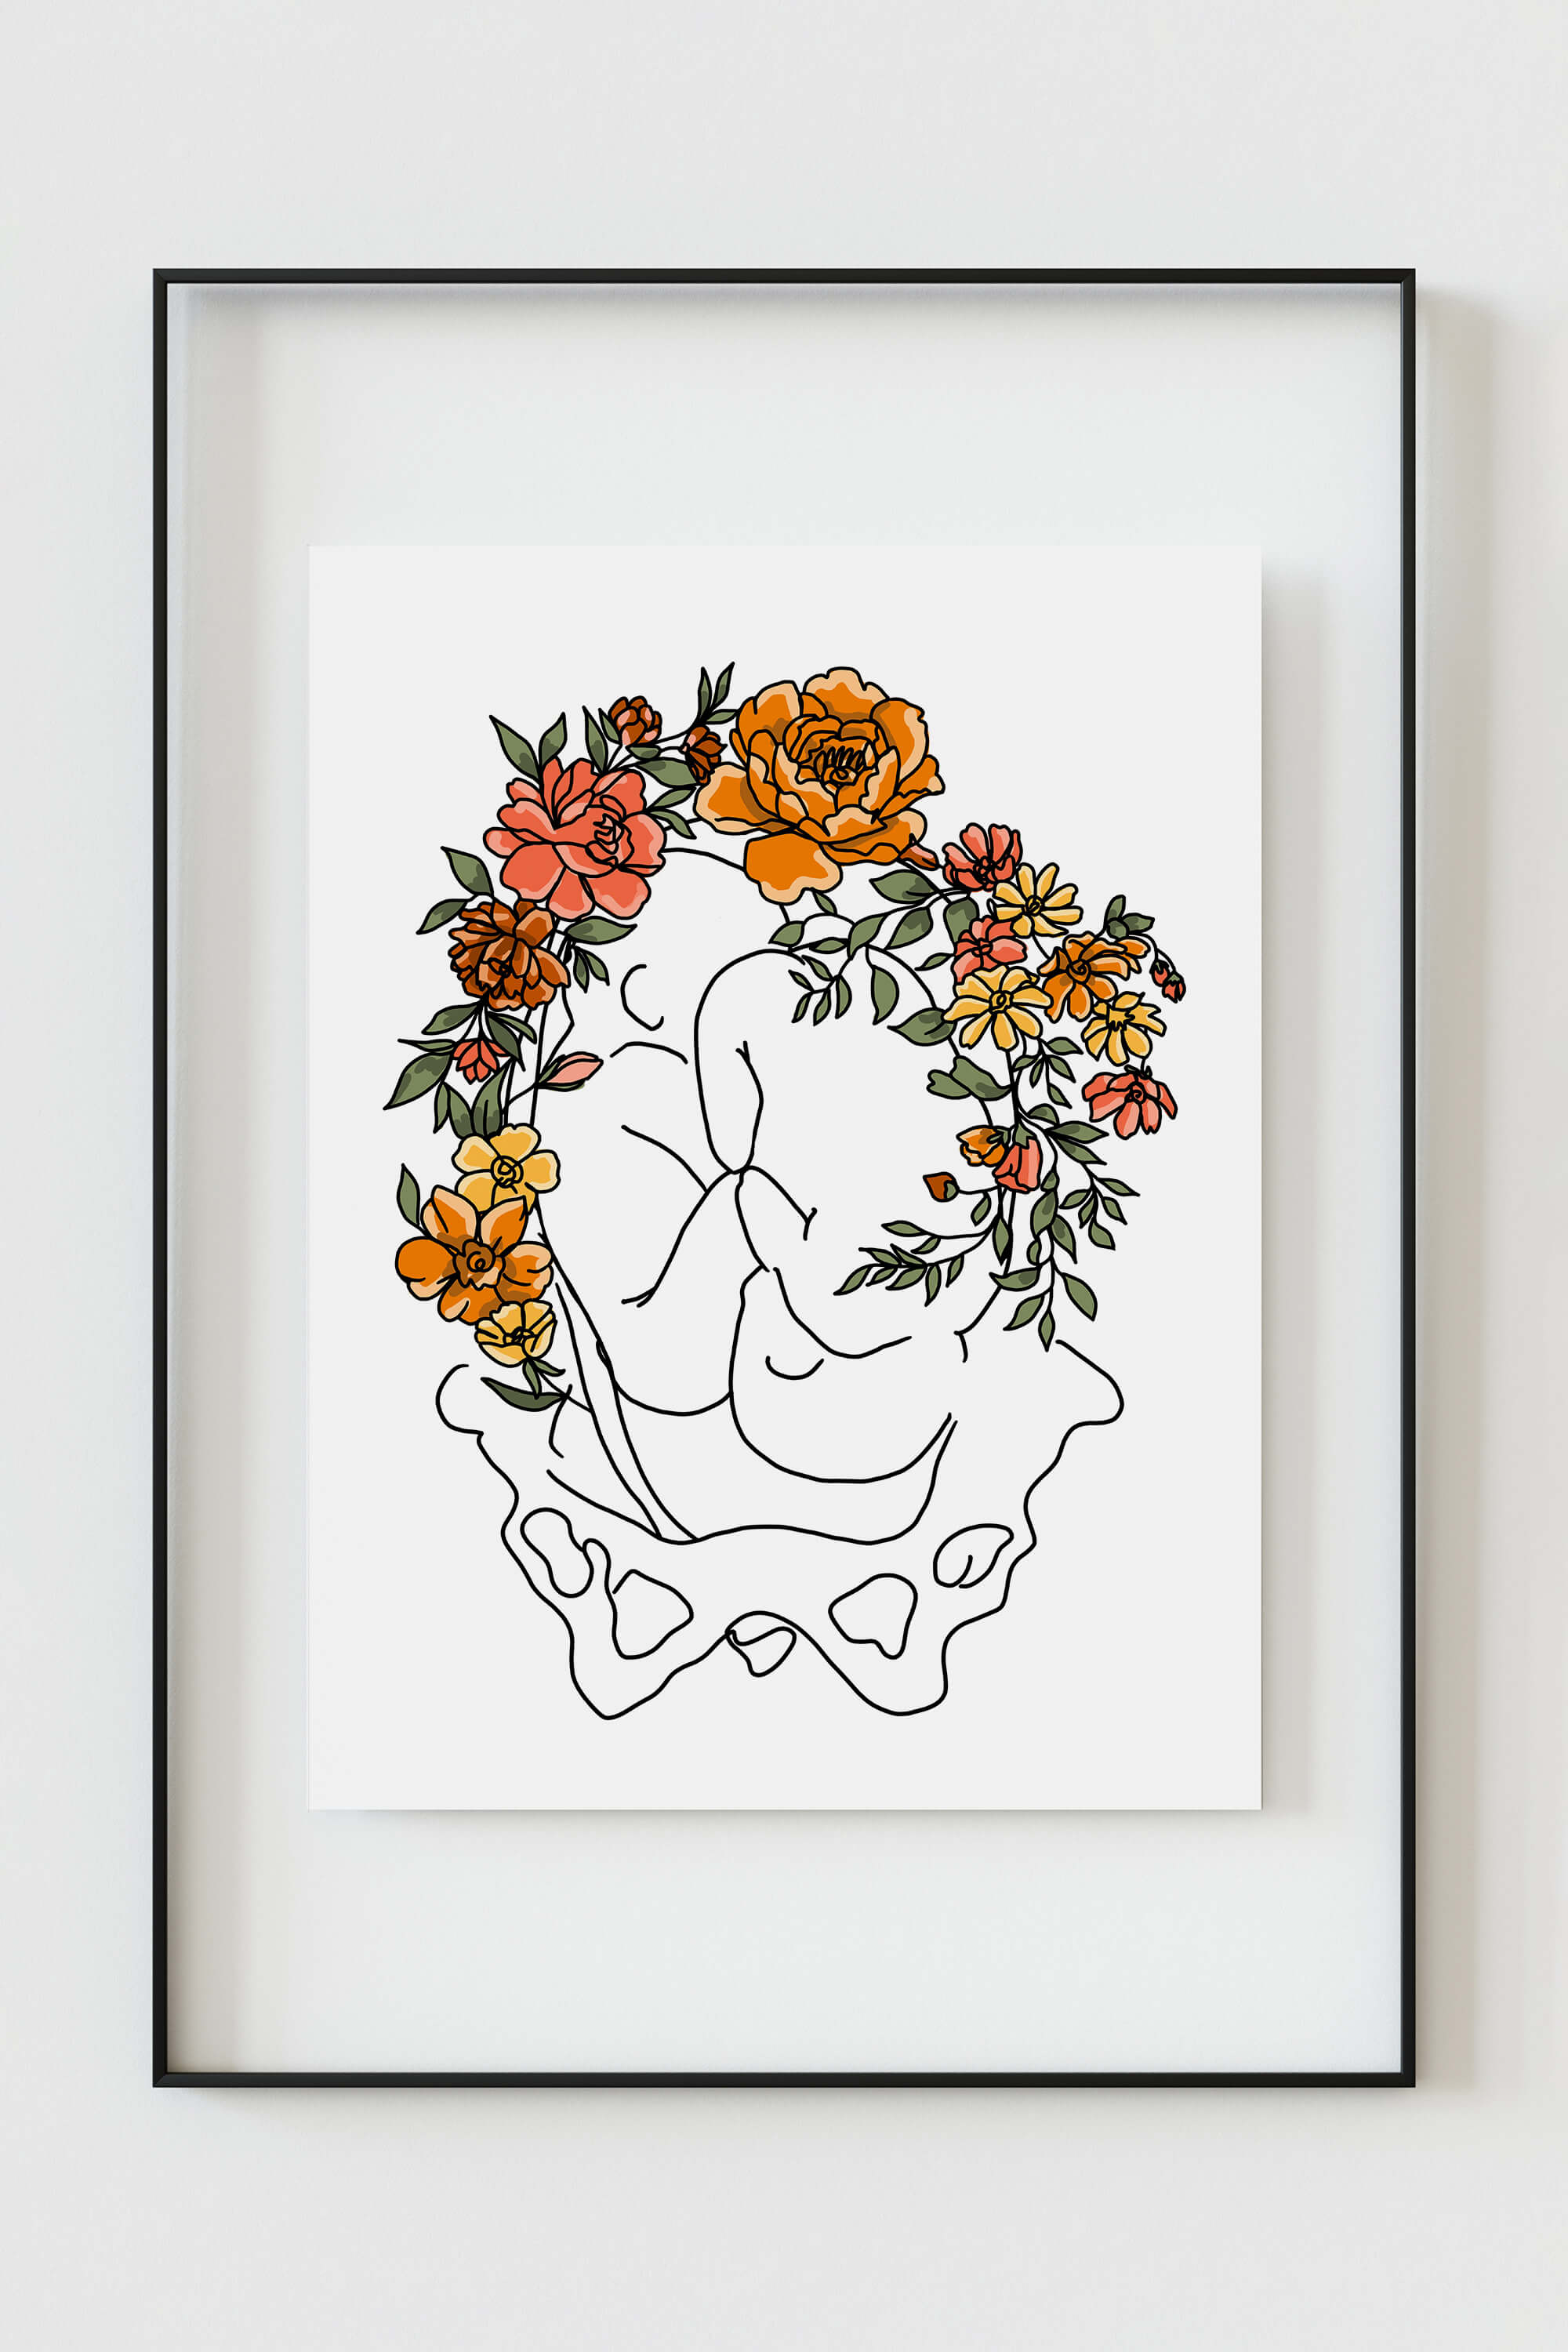 This captivating print features a contemporary take on uterus anatomy, blending colorful, abstract lines. The vibrant hues create a visual symphony, making it a joyful and stylish addition to any art collection.